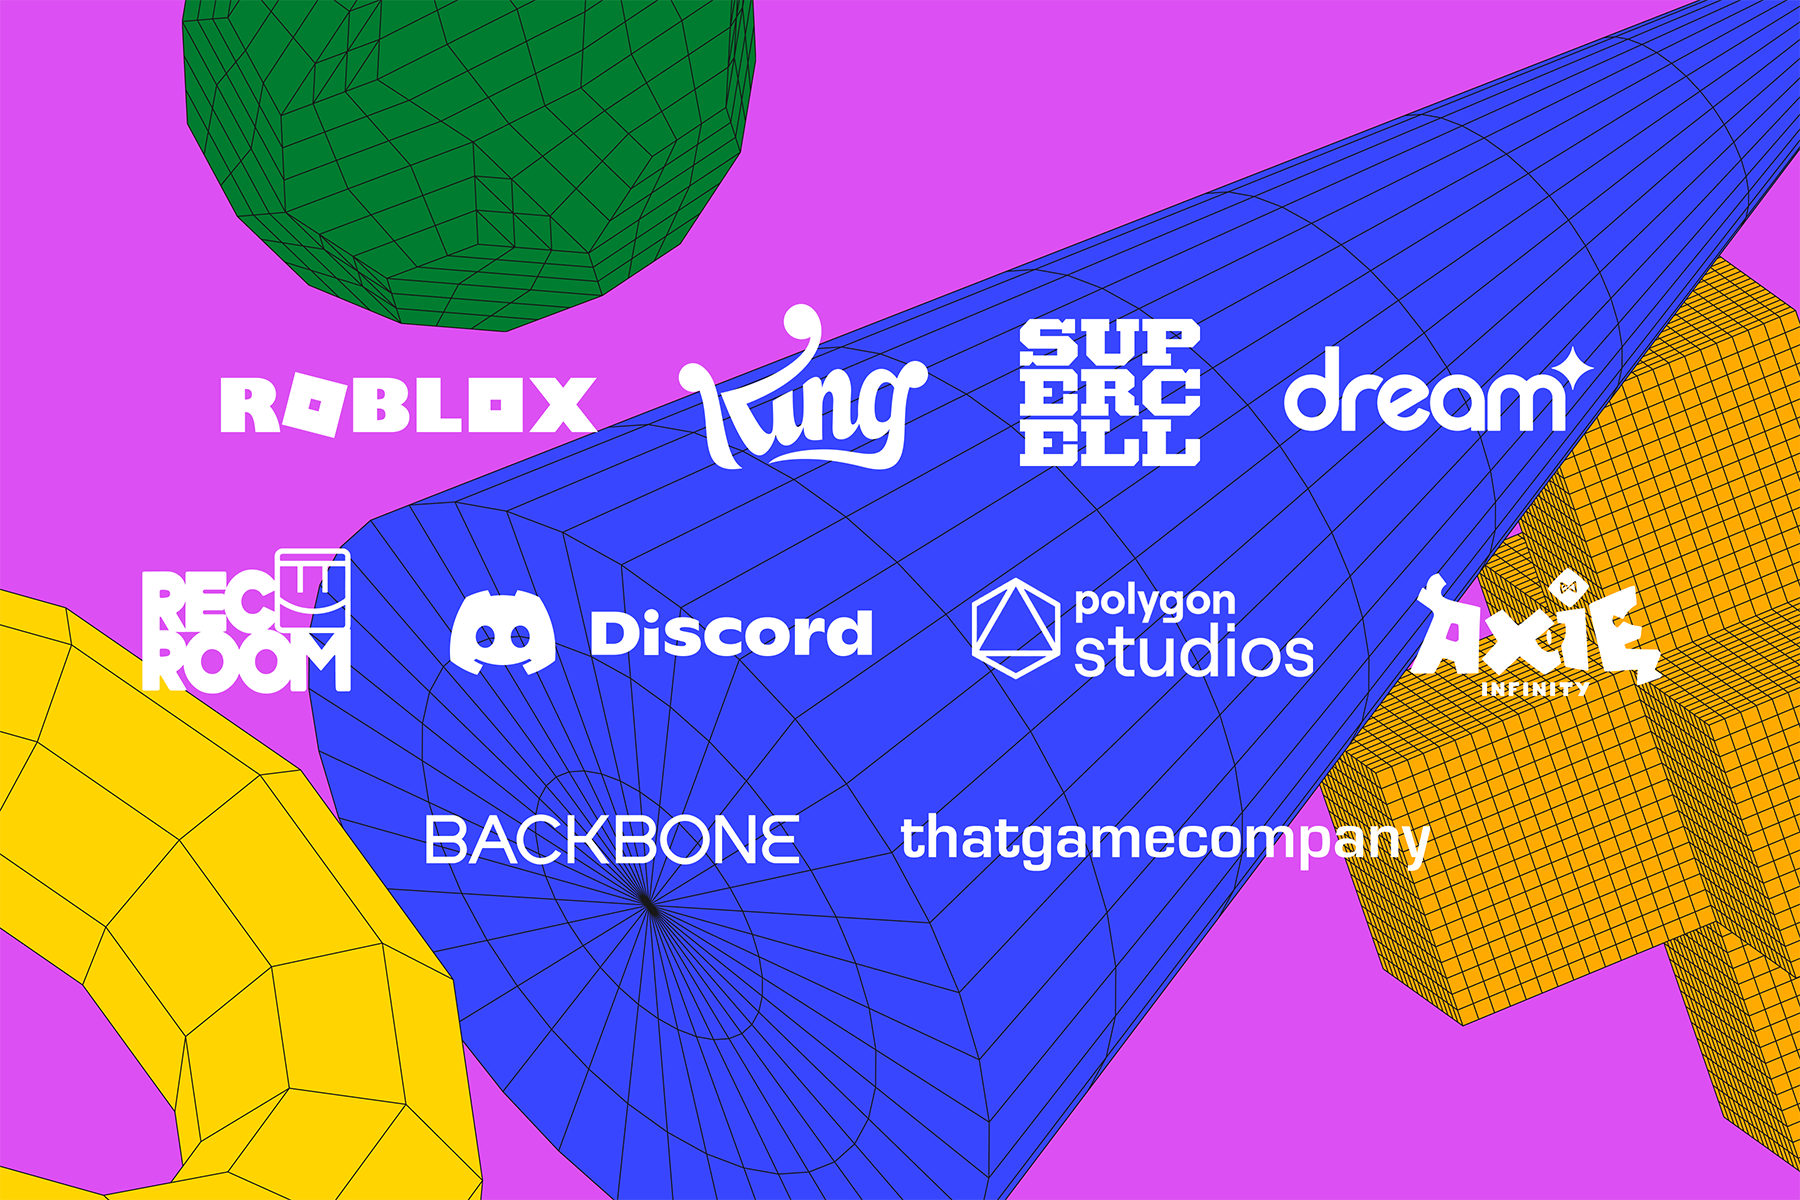 Index brought together founders and execs of gaming companies from its portfolio and beyond to discuss the trends that are dominating the industry in 2022